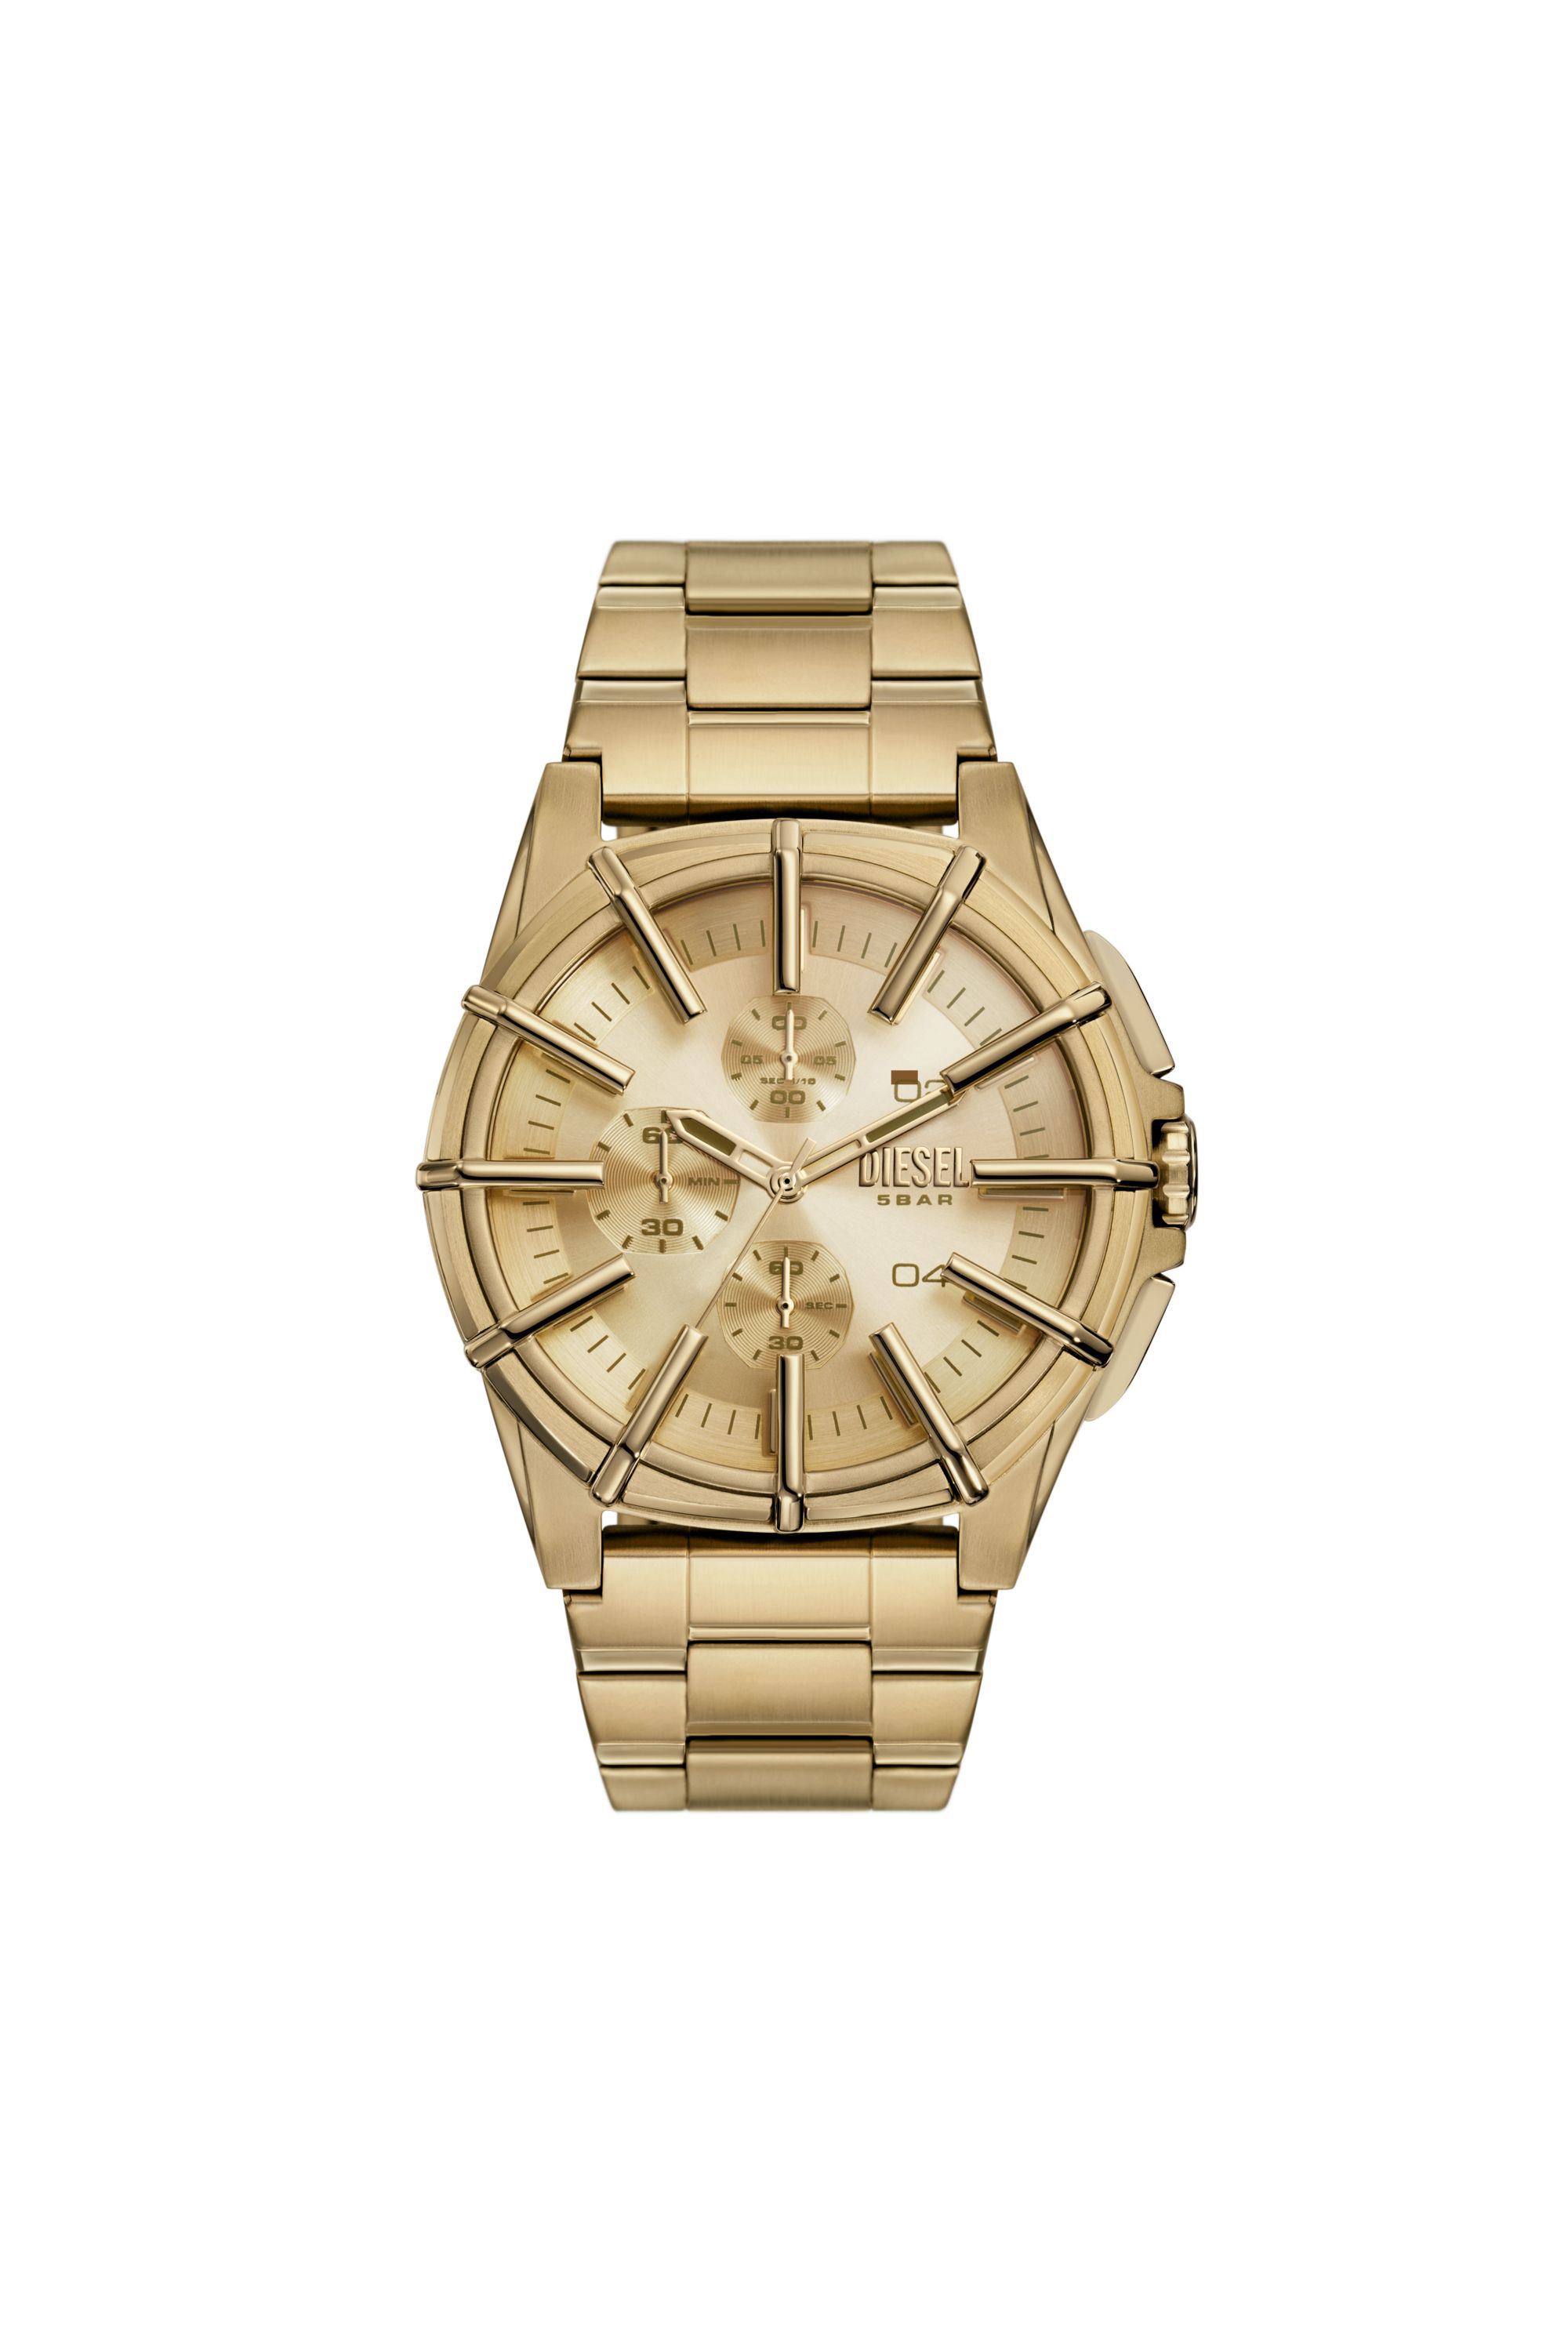 Diesel Men's Framed Chronograph Gold-tone Stainless Steel Watch 44mm In Oro